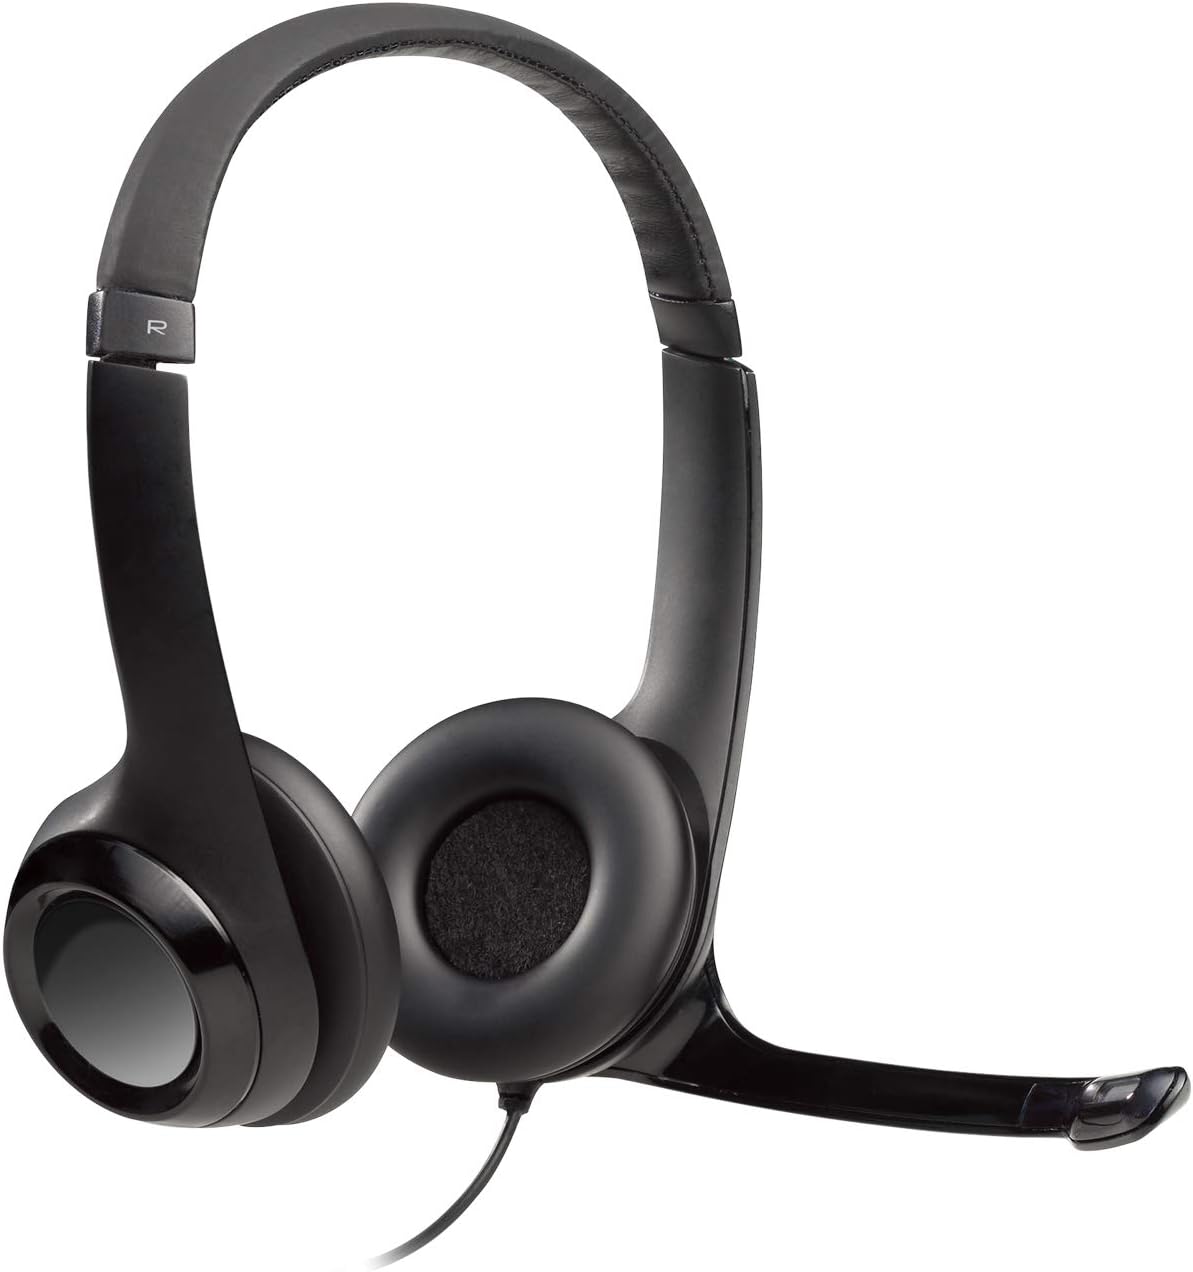 Logitech H390 USB Headset with Noise-Cancelling Mic Black , 16 Count